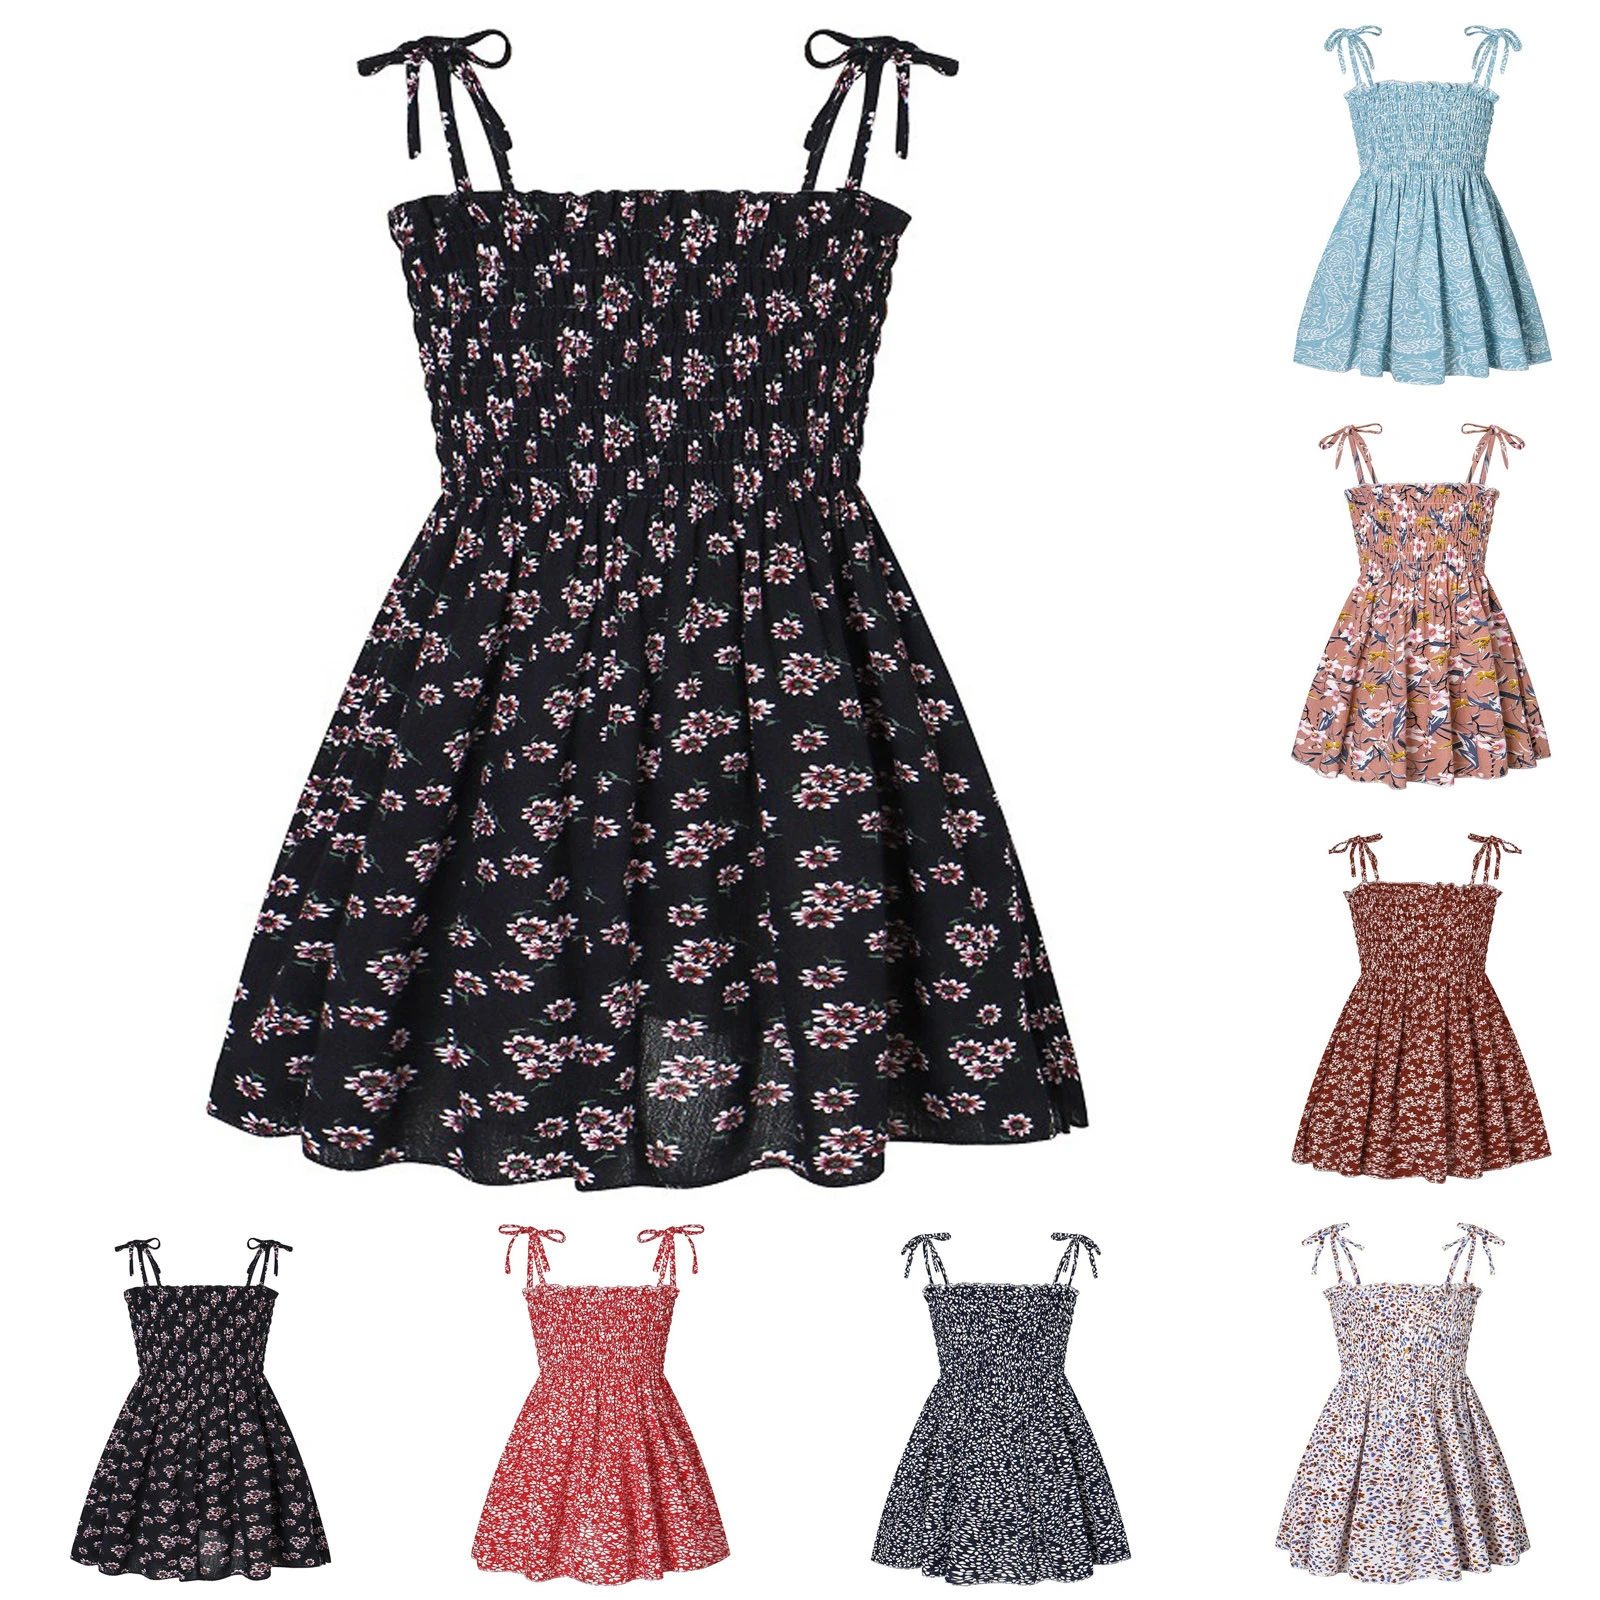 bridesmaid dresses 1Y-5Y Kid Girl's Strap Suspender Solid Color Dress Skirt Party Princess Bib Strap Skirt Clothes Outfits Dress dresses for women